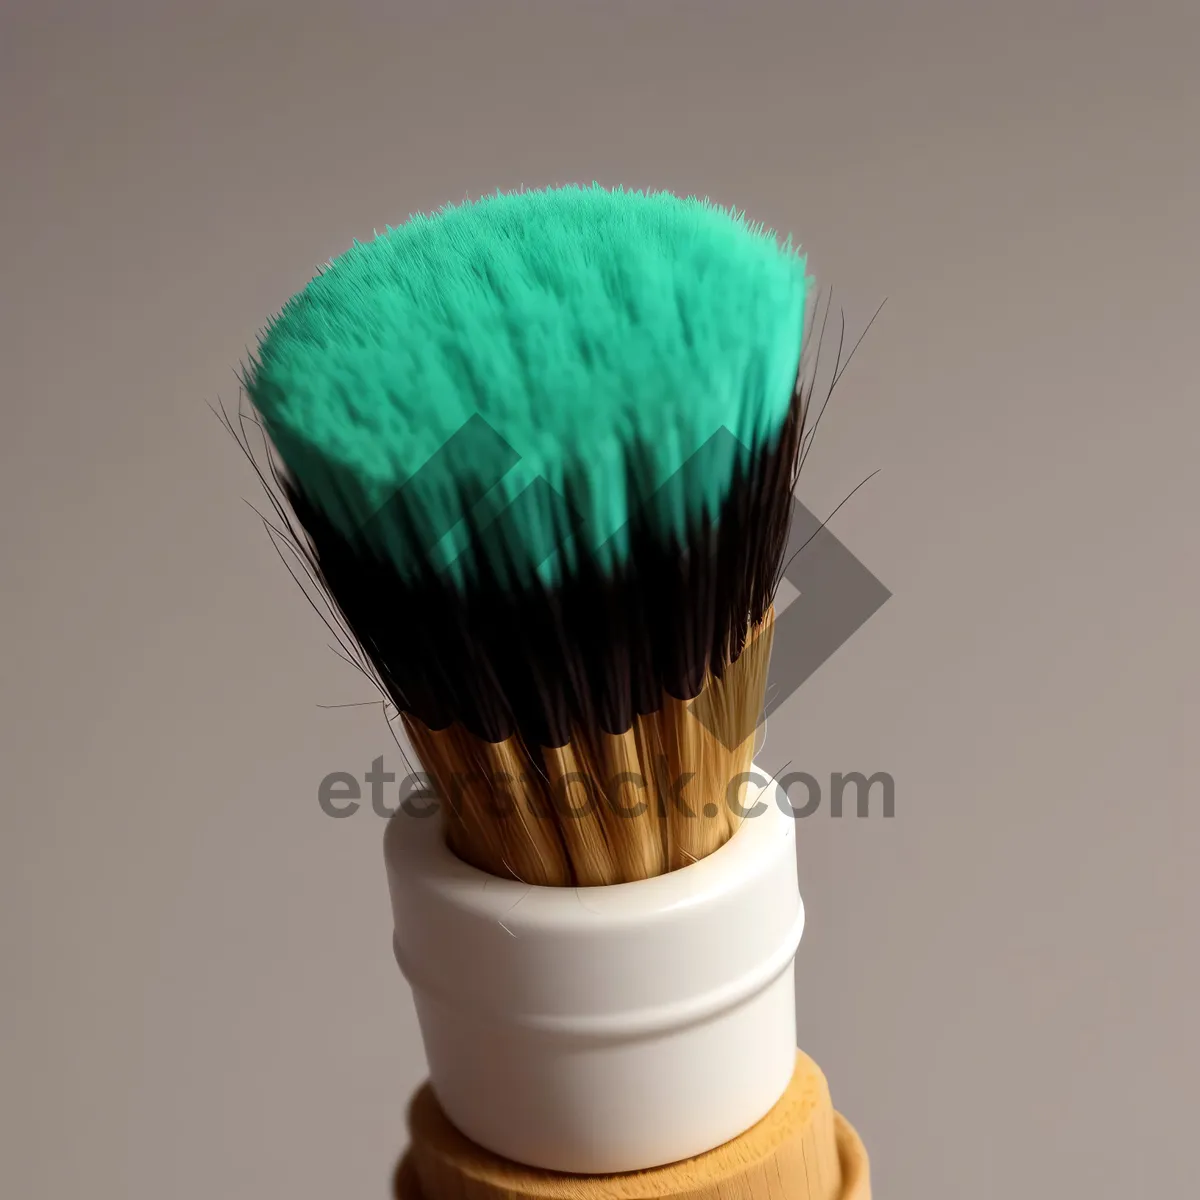 Picture of Versatile Brush Collection for Artists, Makeup, and DIY Projects